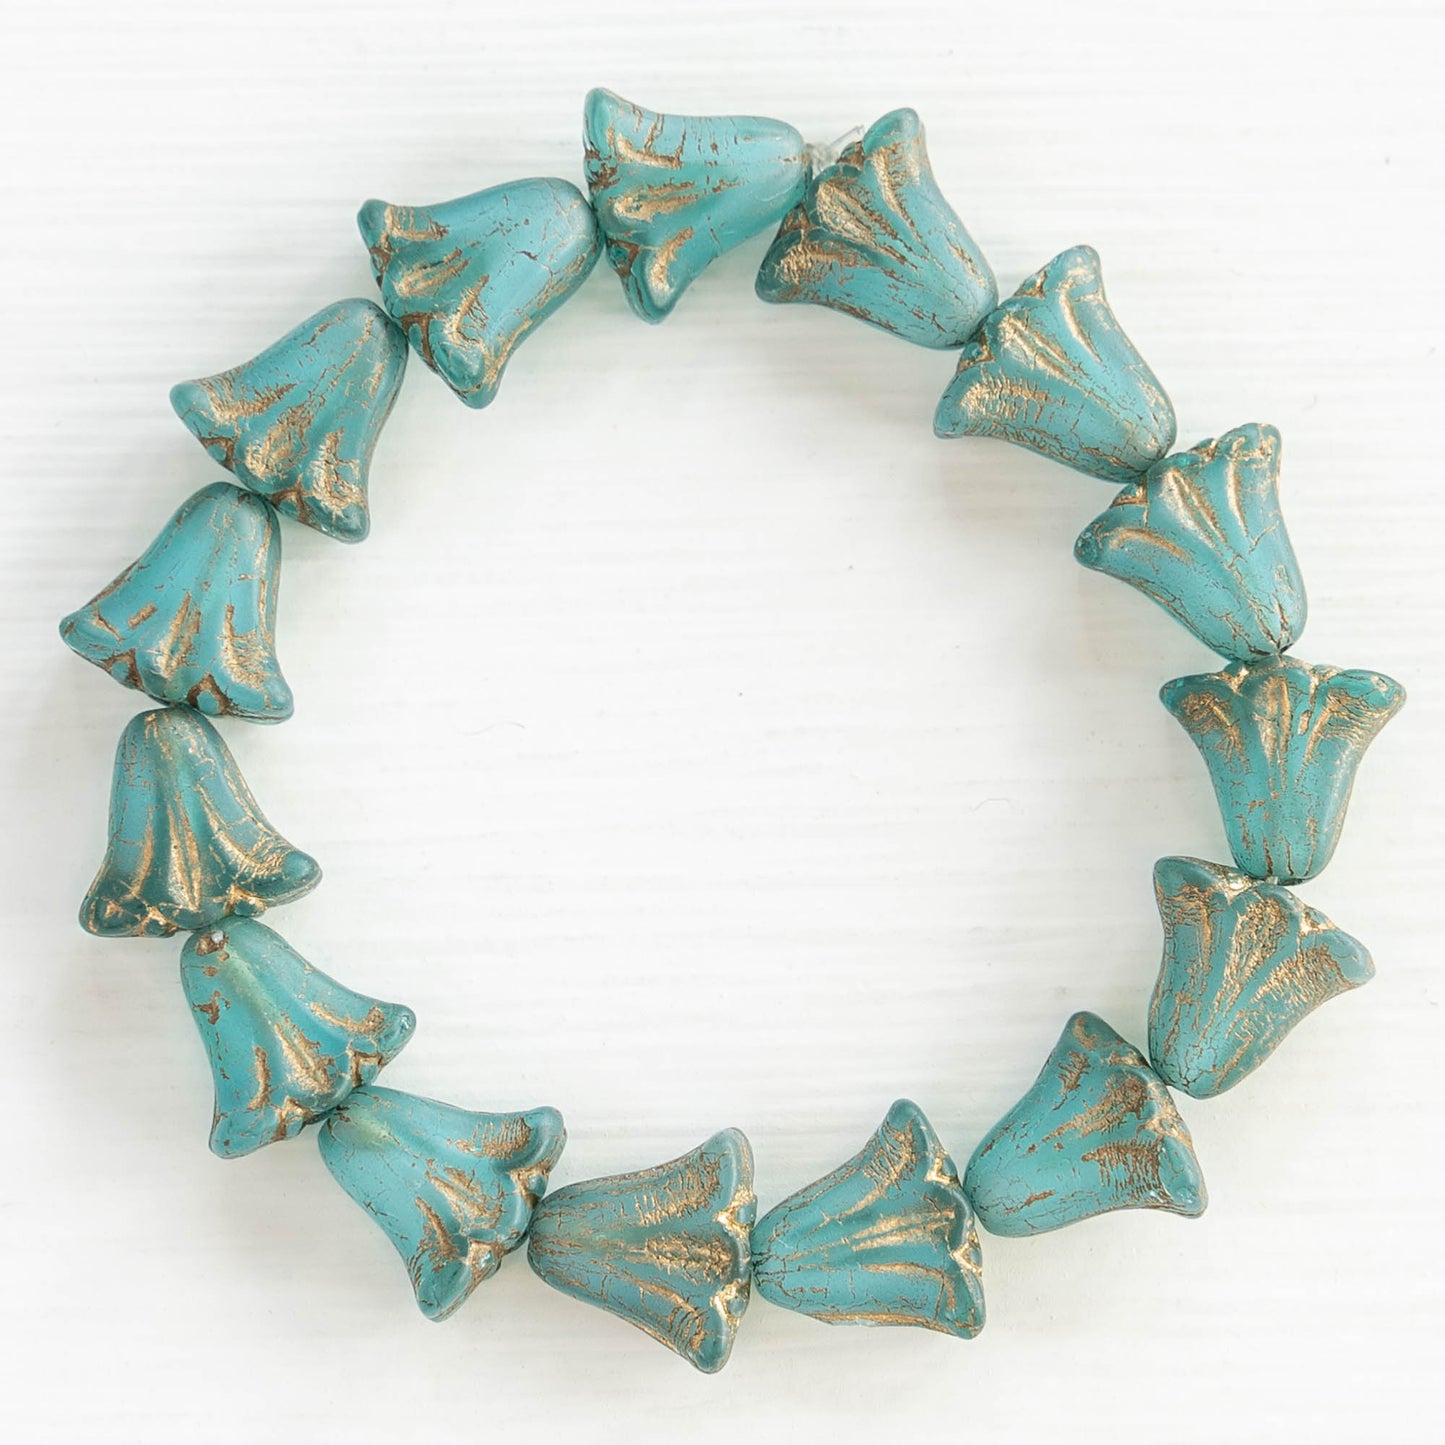 Load image into Gallery viewer, 9x10mm Lily Flower Beads - Aqua with Gold Wash - 15 Beads
